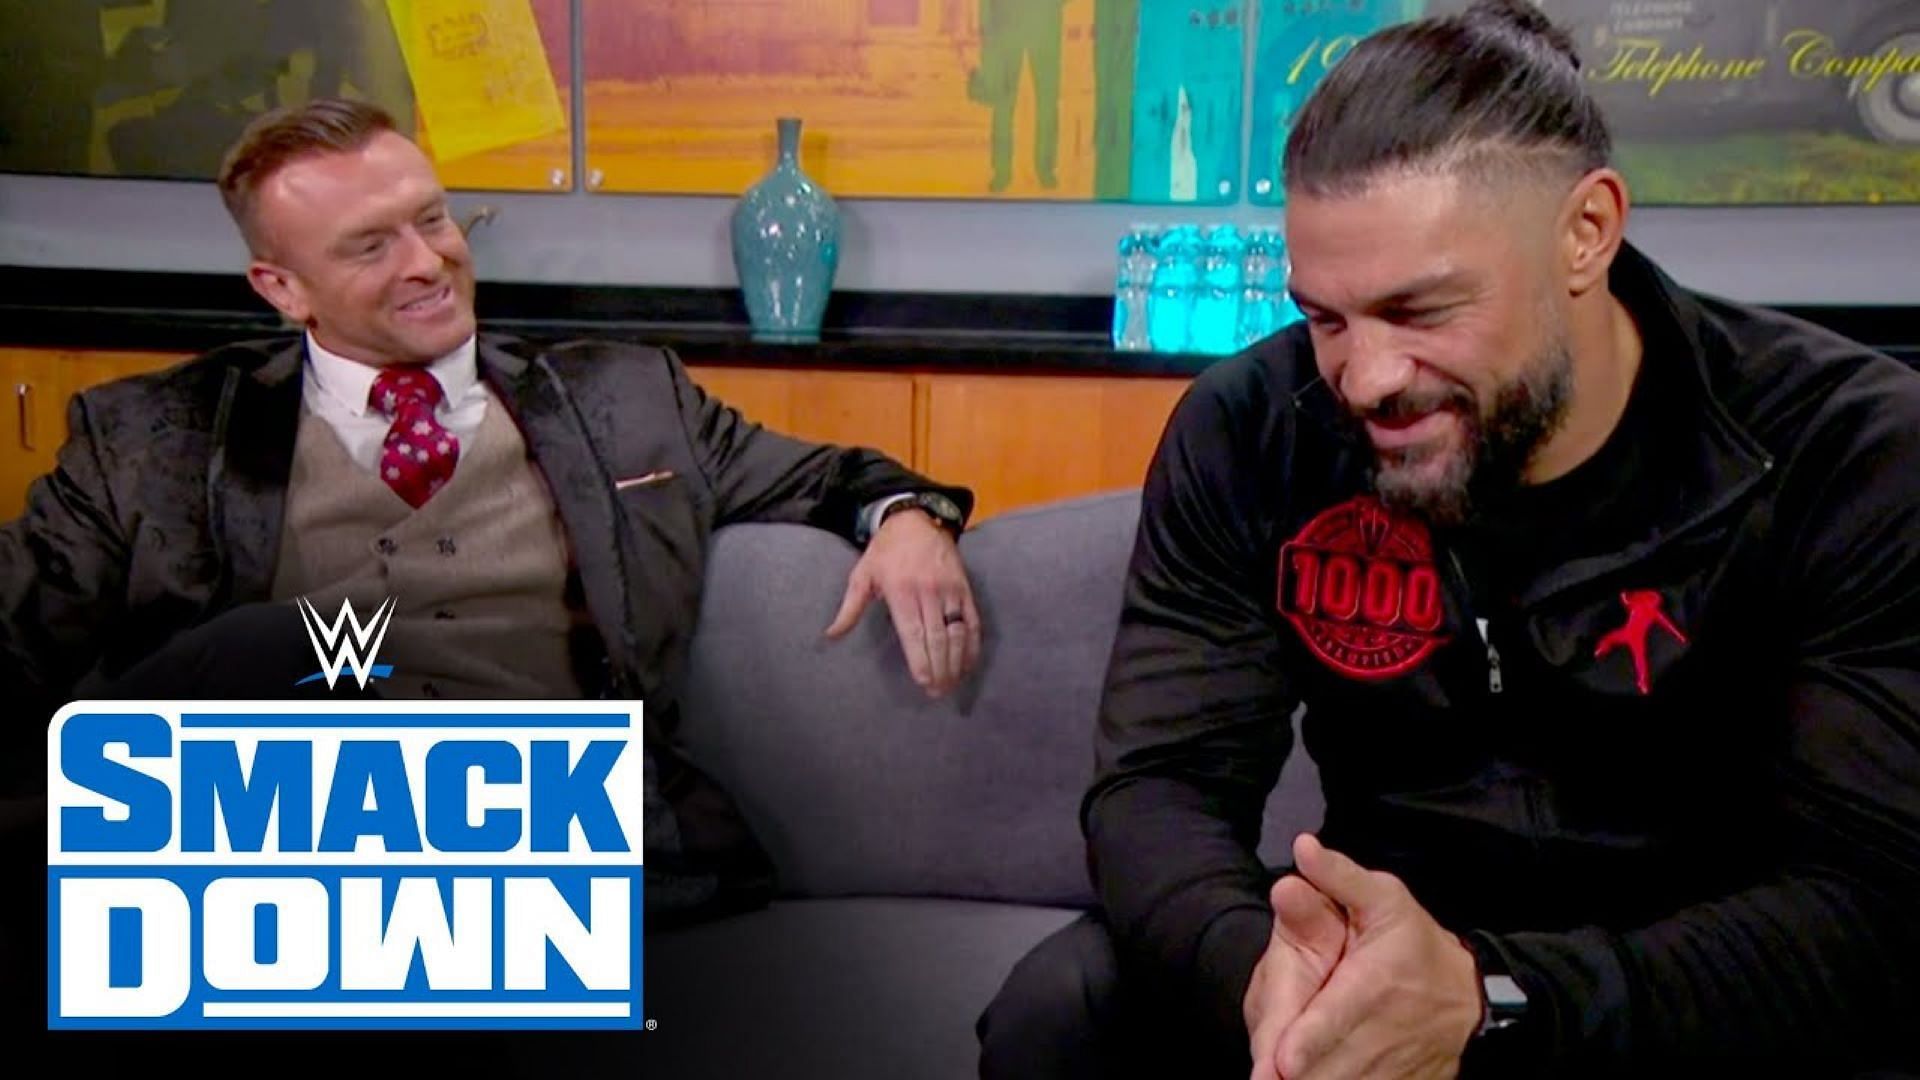 SmackDown GM Nick Aldis and Roman Reigns have been at odds from the very beginning.